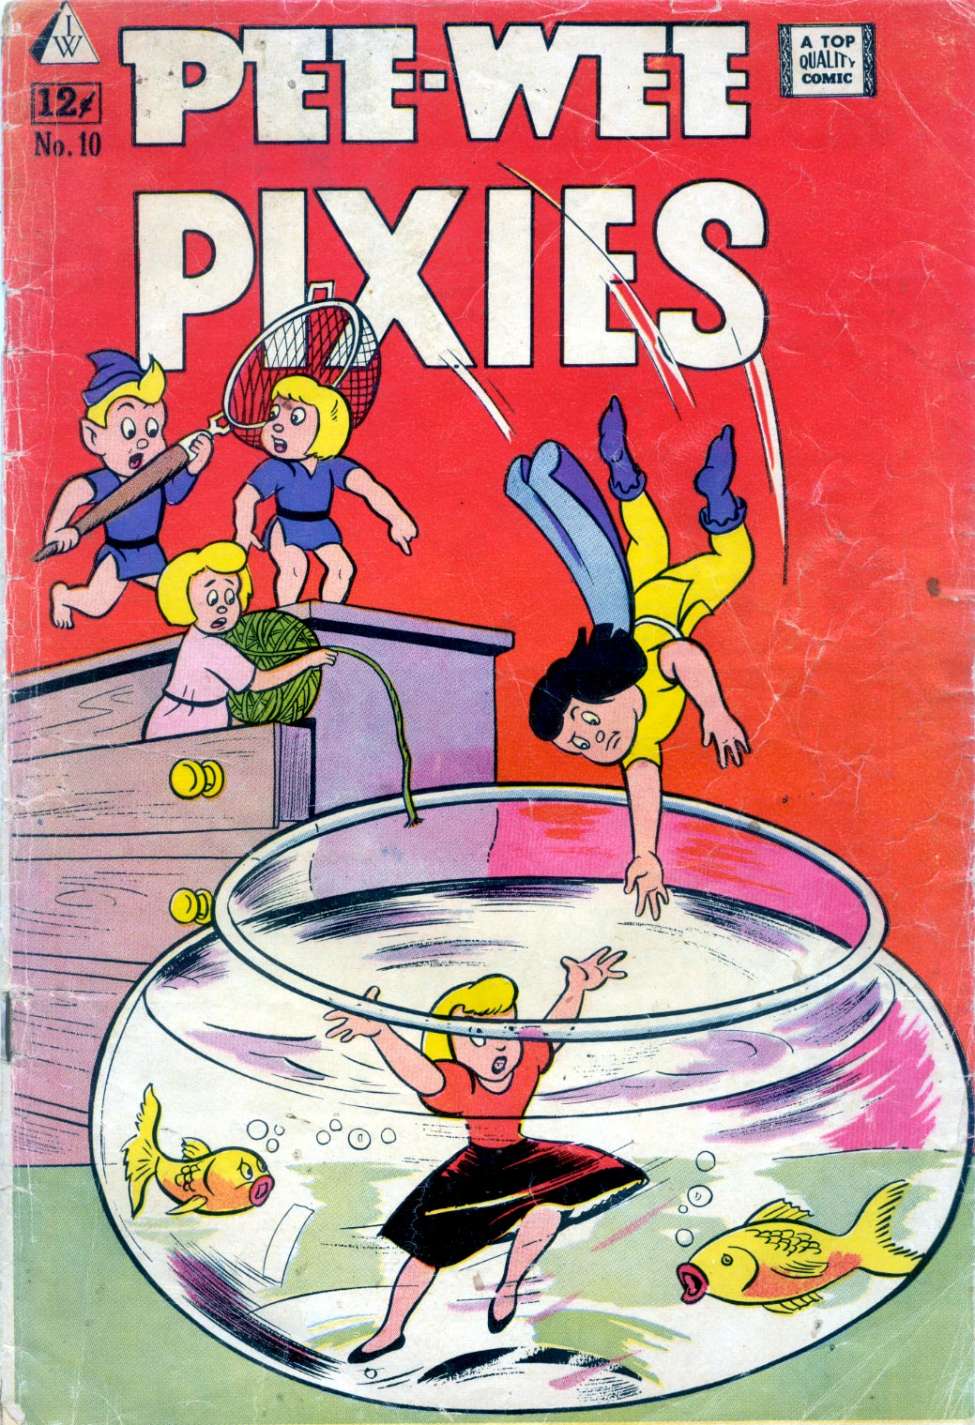 Book Cover For Pee-Wee Pixies 10